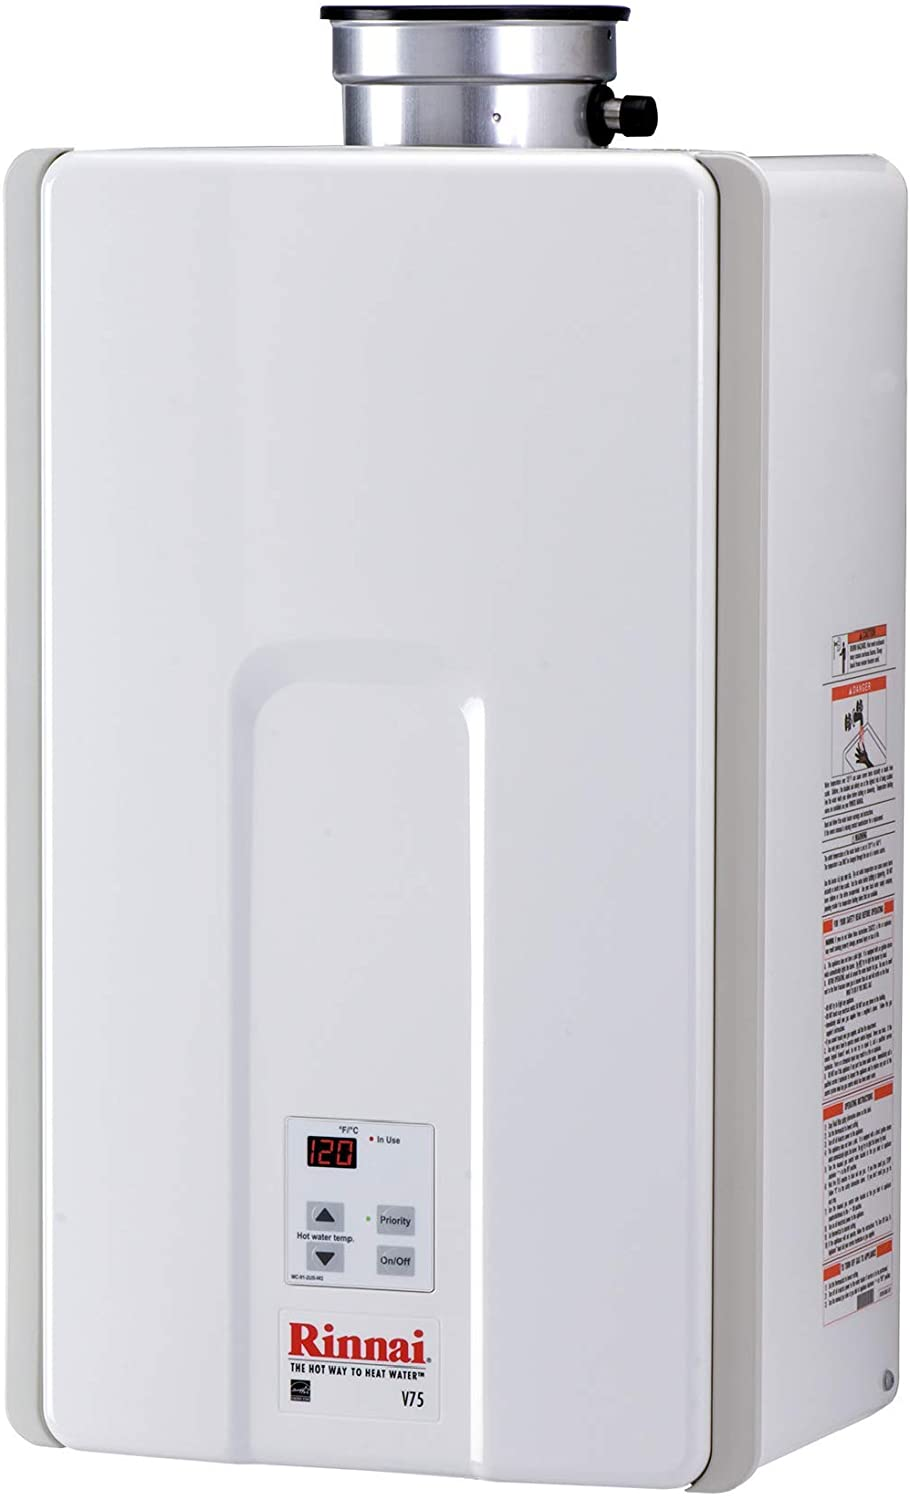 Best Tankless Water Heater Electric of 2022